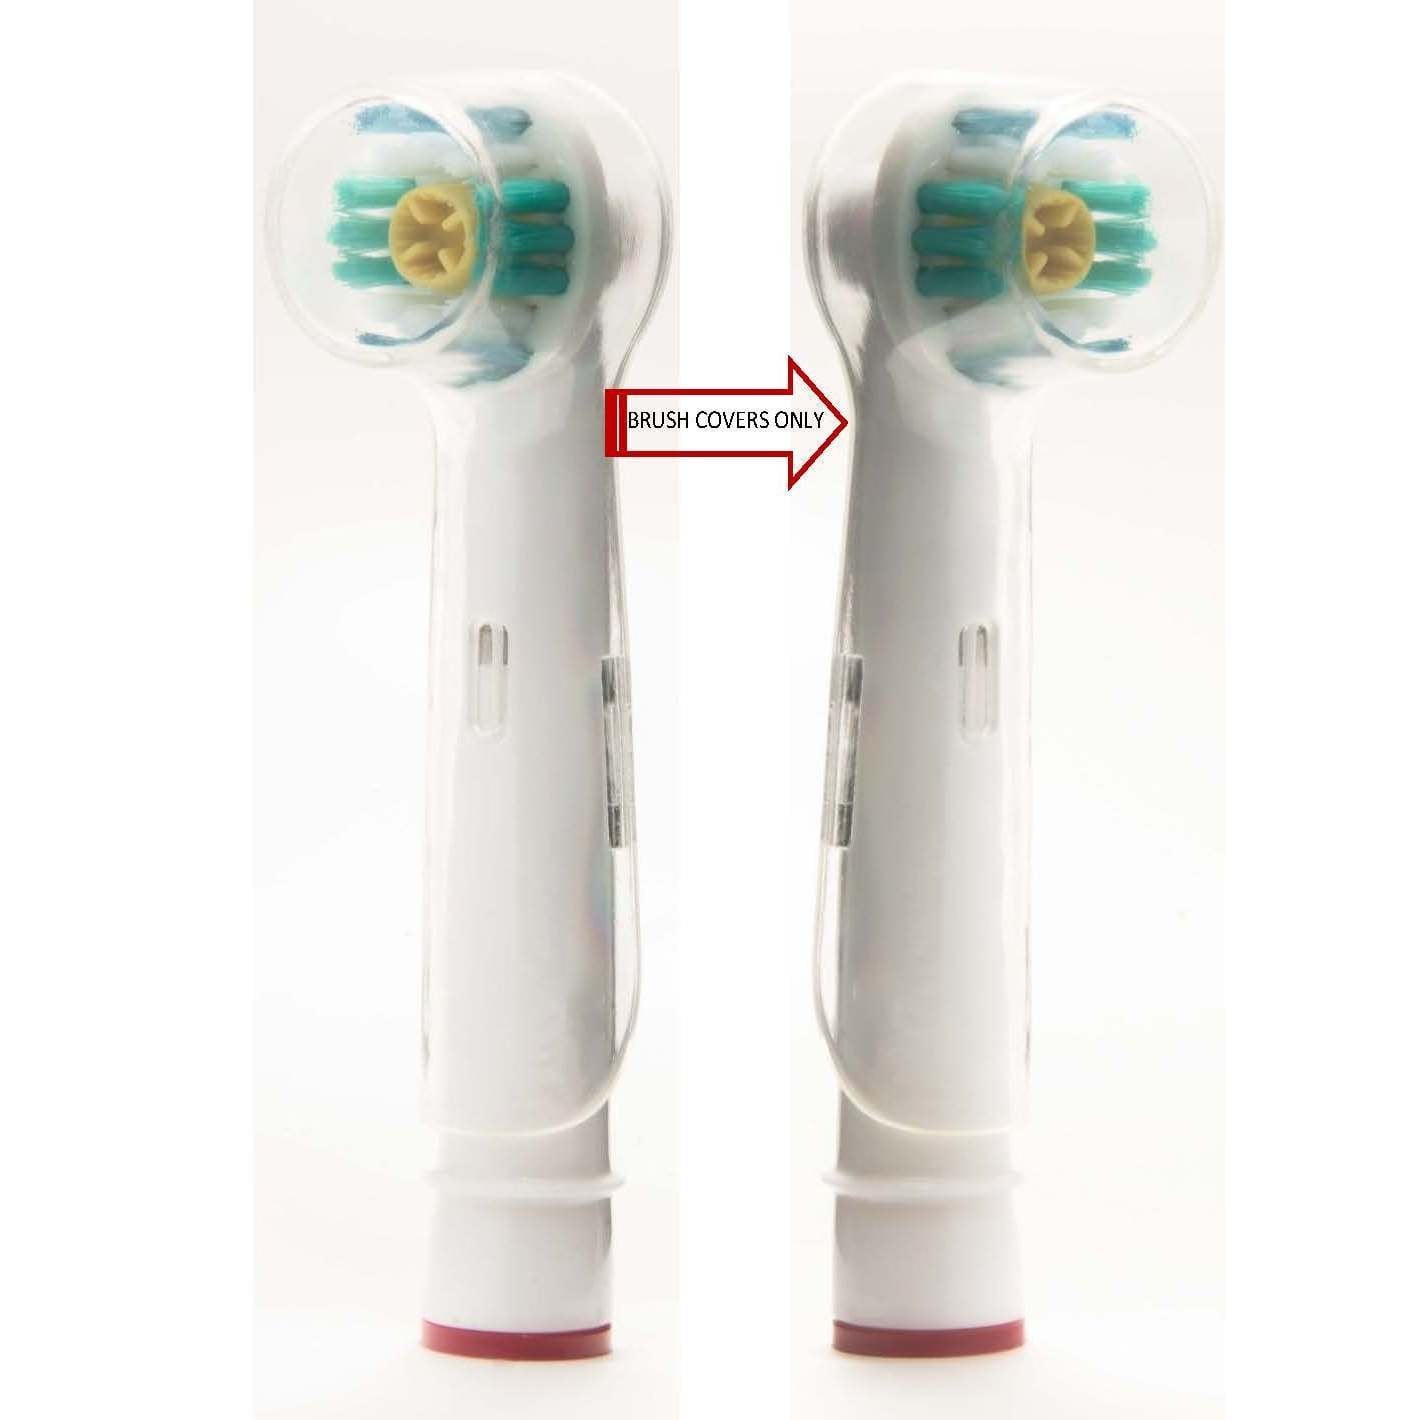 Details about   Electric Toothbrush Round Head Cover Anti Dust For Oral Price L6C0 Low L1N7 